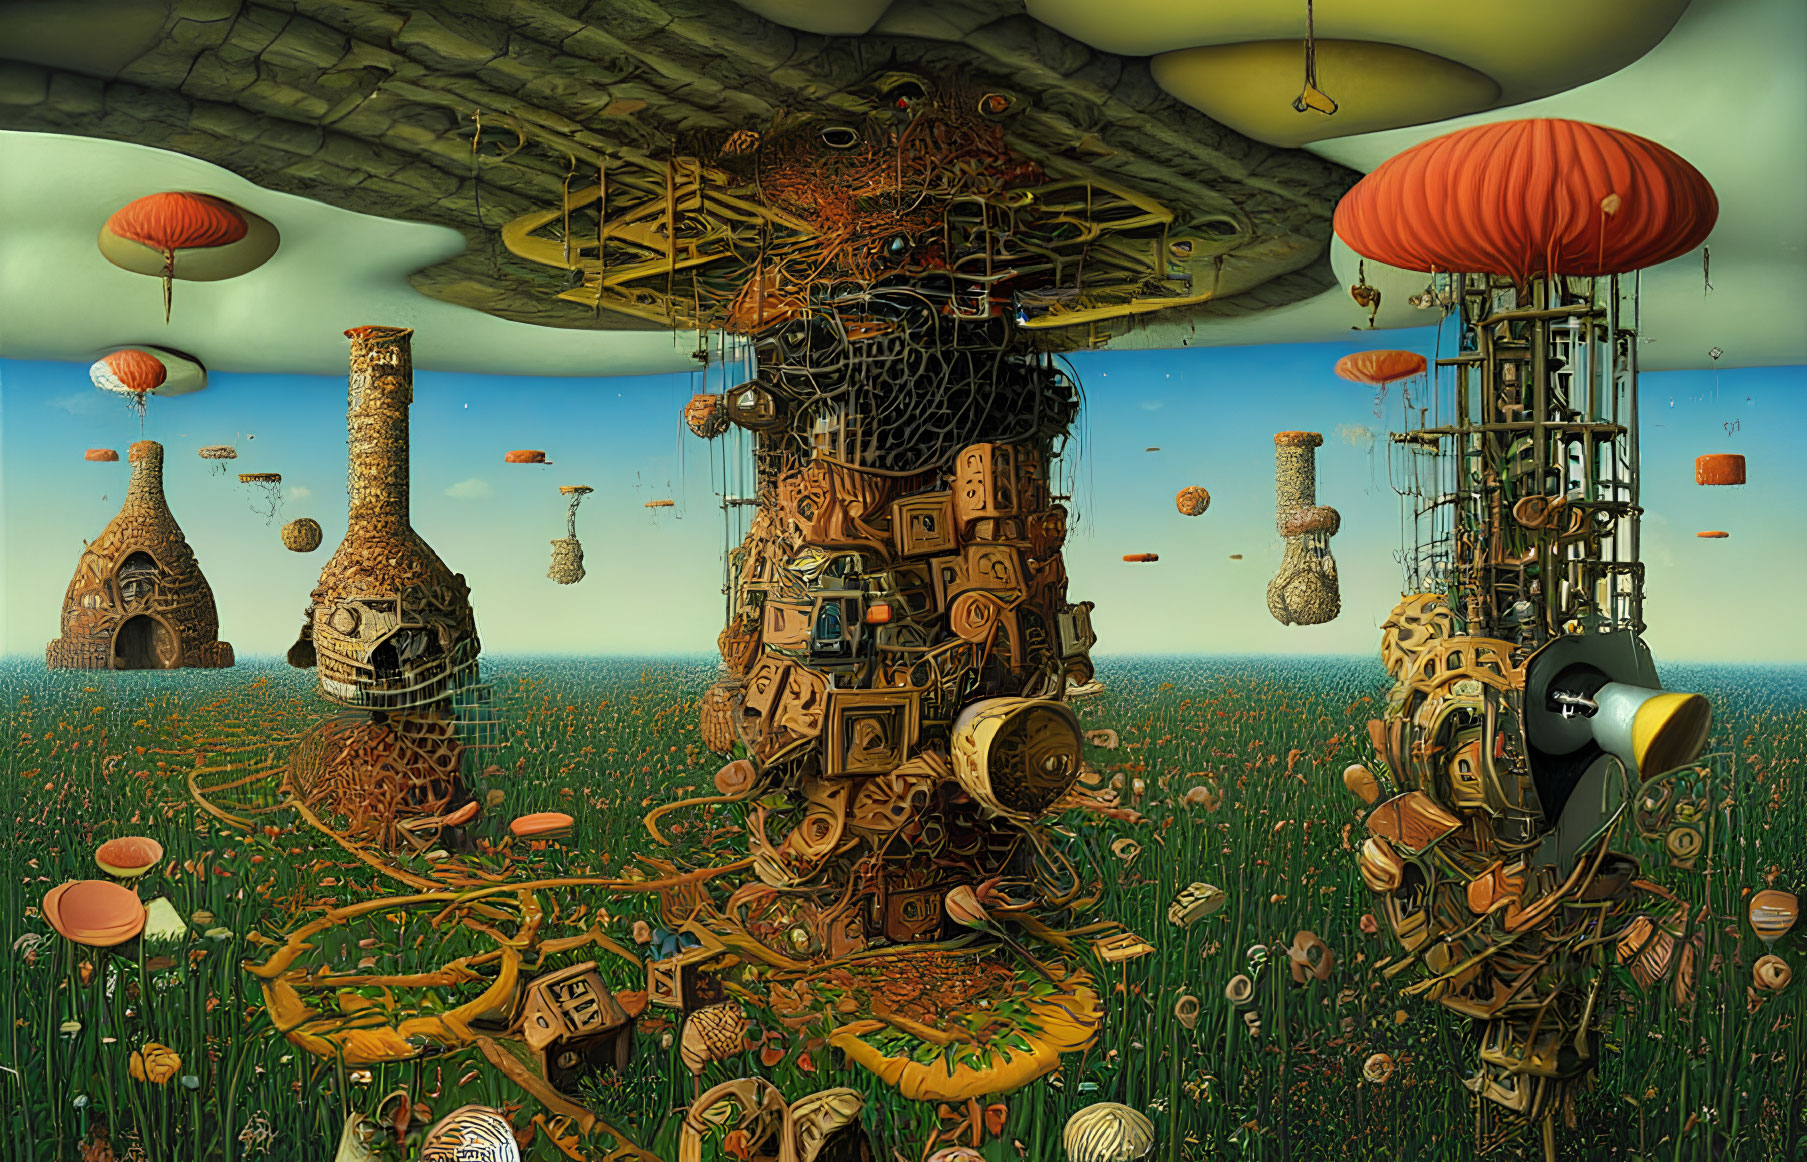 Surreal landscape with mechanical towers and floating islands